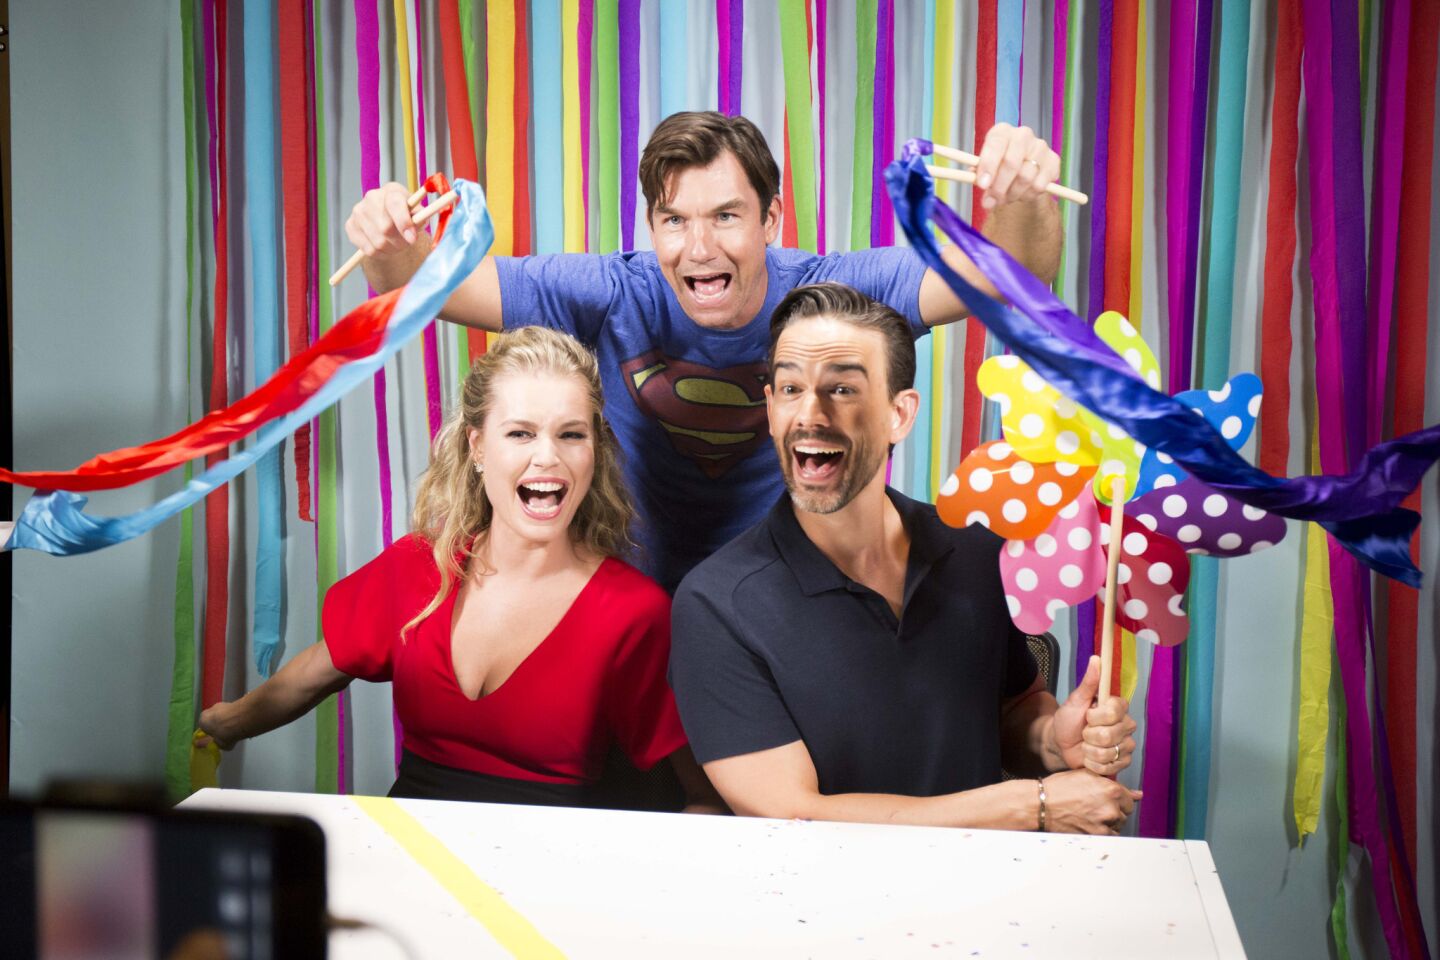 Rebecca Romijn, Jerry O' Connell and Christoper Gorham from the animated film "The Death of Superman."